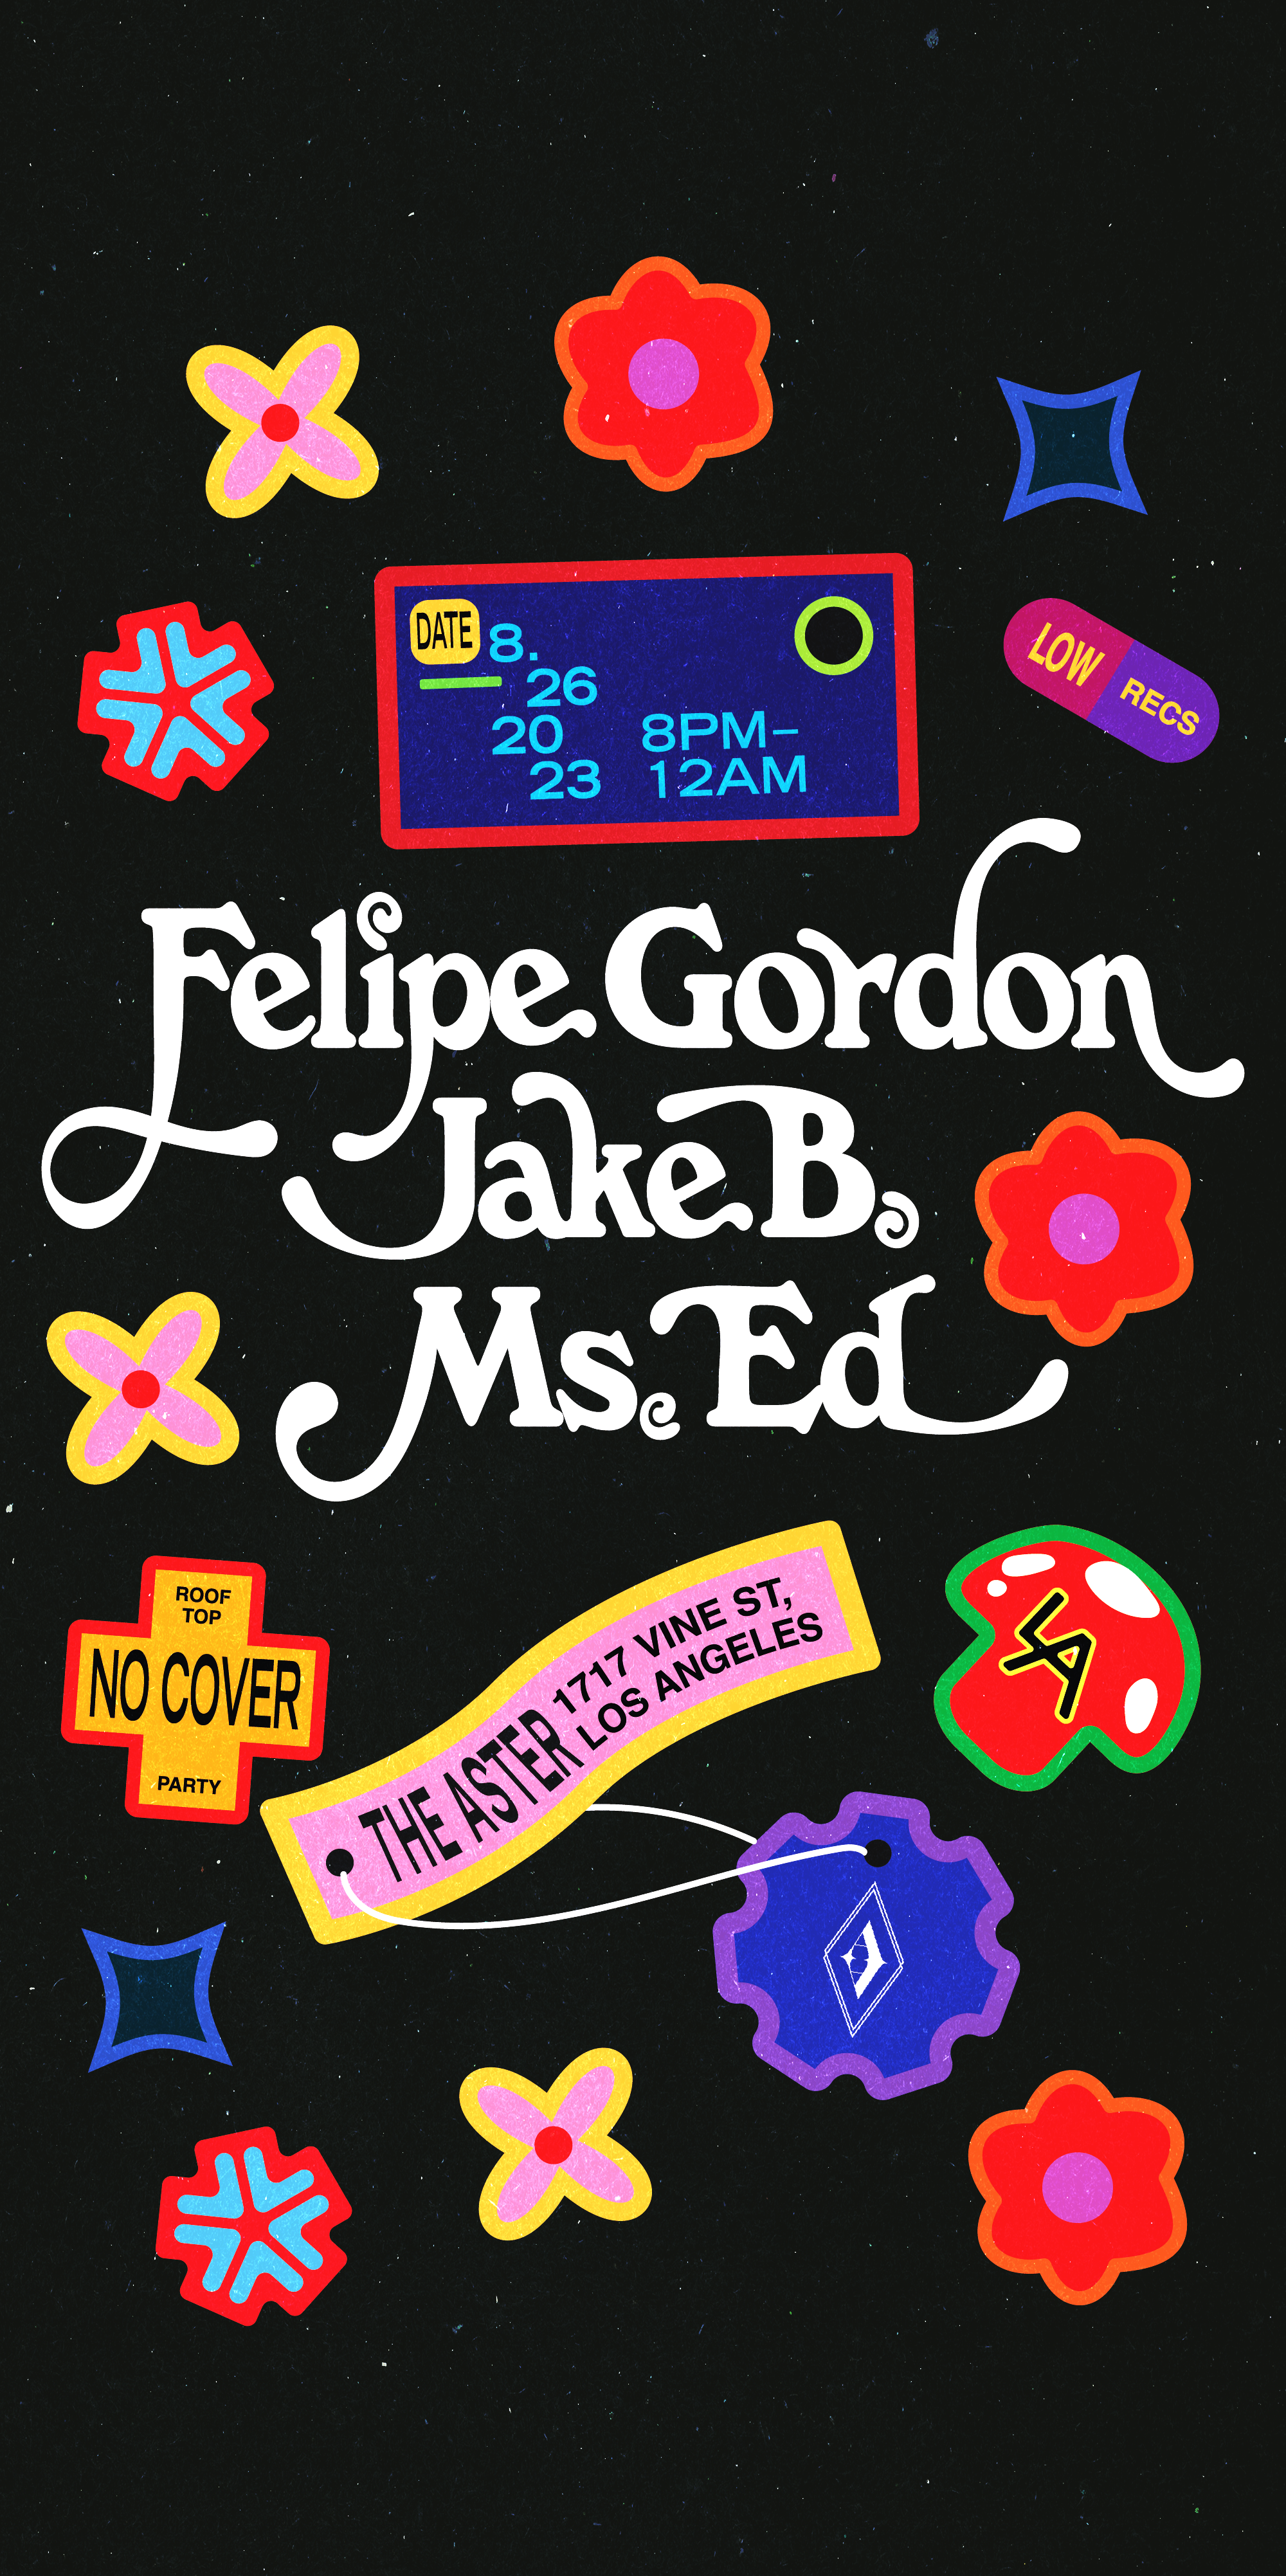 Low: Felipe Gordon, Jake B, Ms. Ed at The Aster Rooftop - フライヤー表